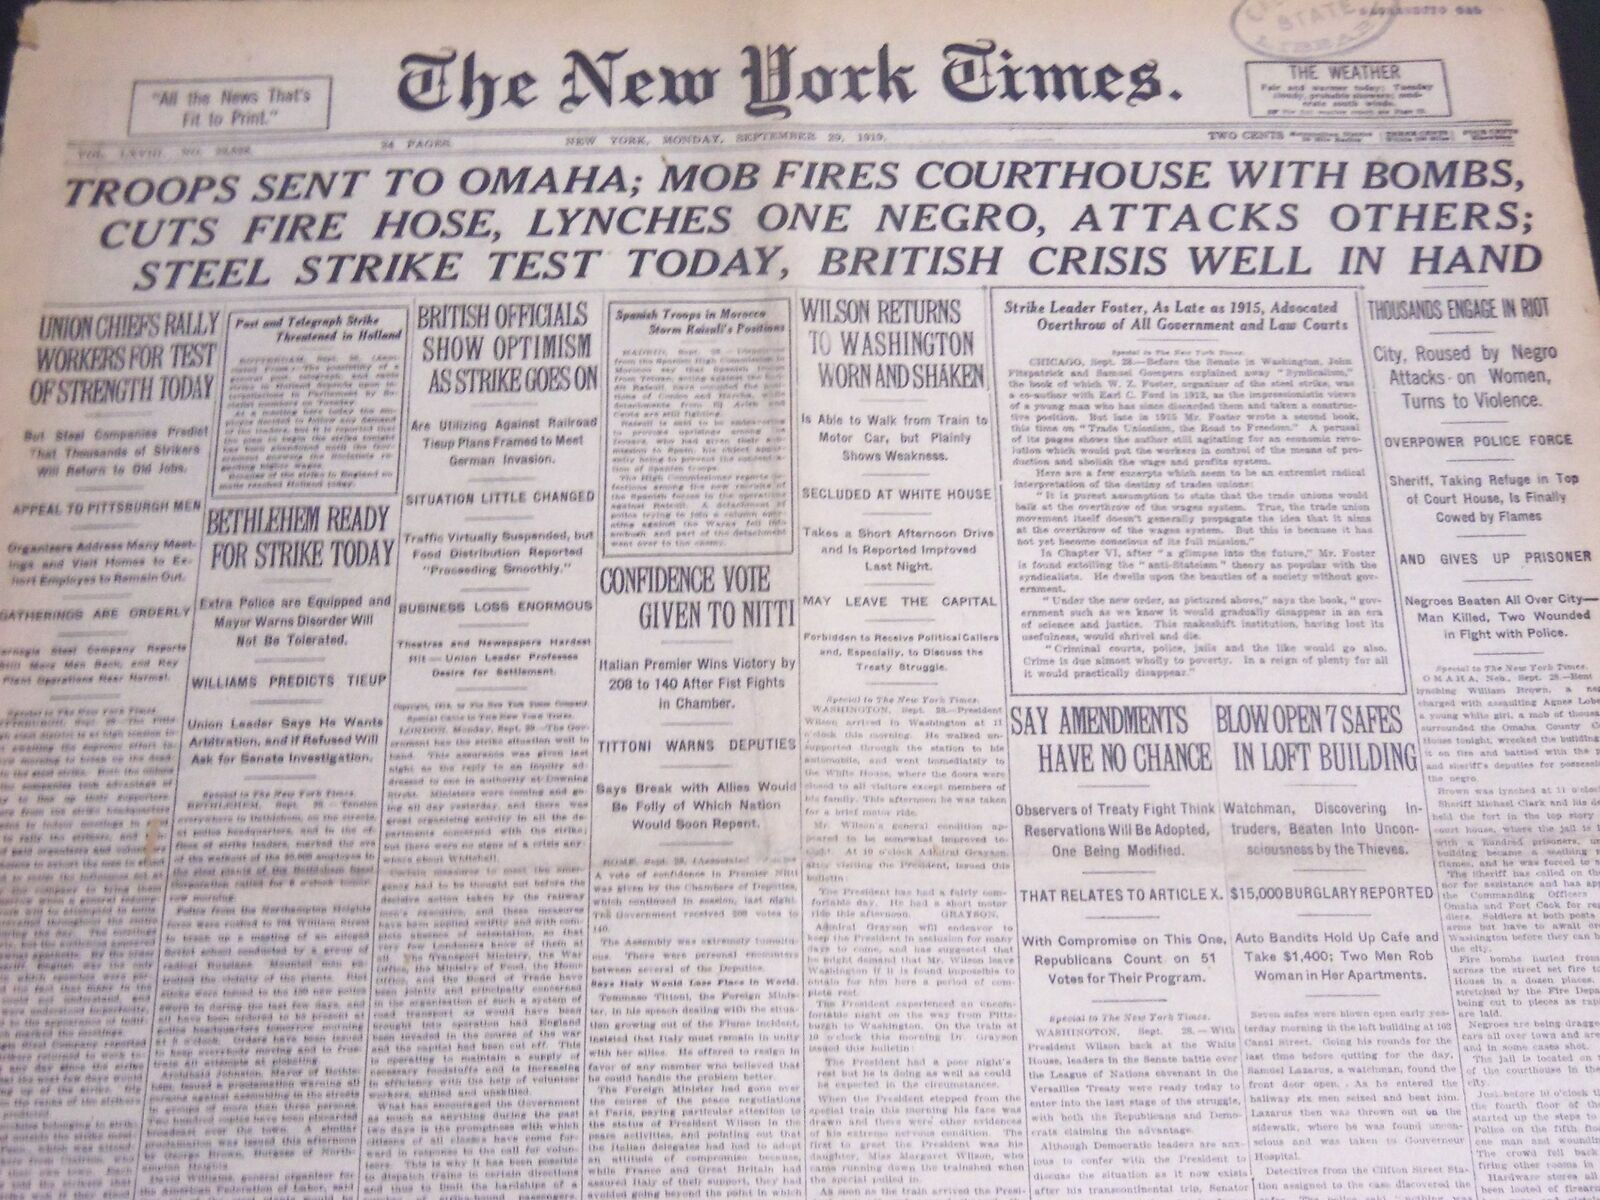 1919 SEPT 29 NEW YORK TIMES - TROOPS SENT TO OMAHA MOB BOMBS COURTHOUSE- NT 7036